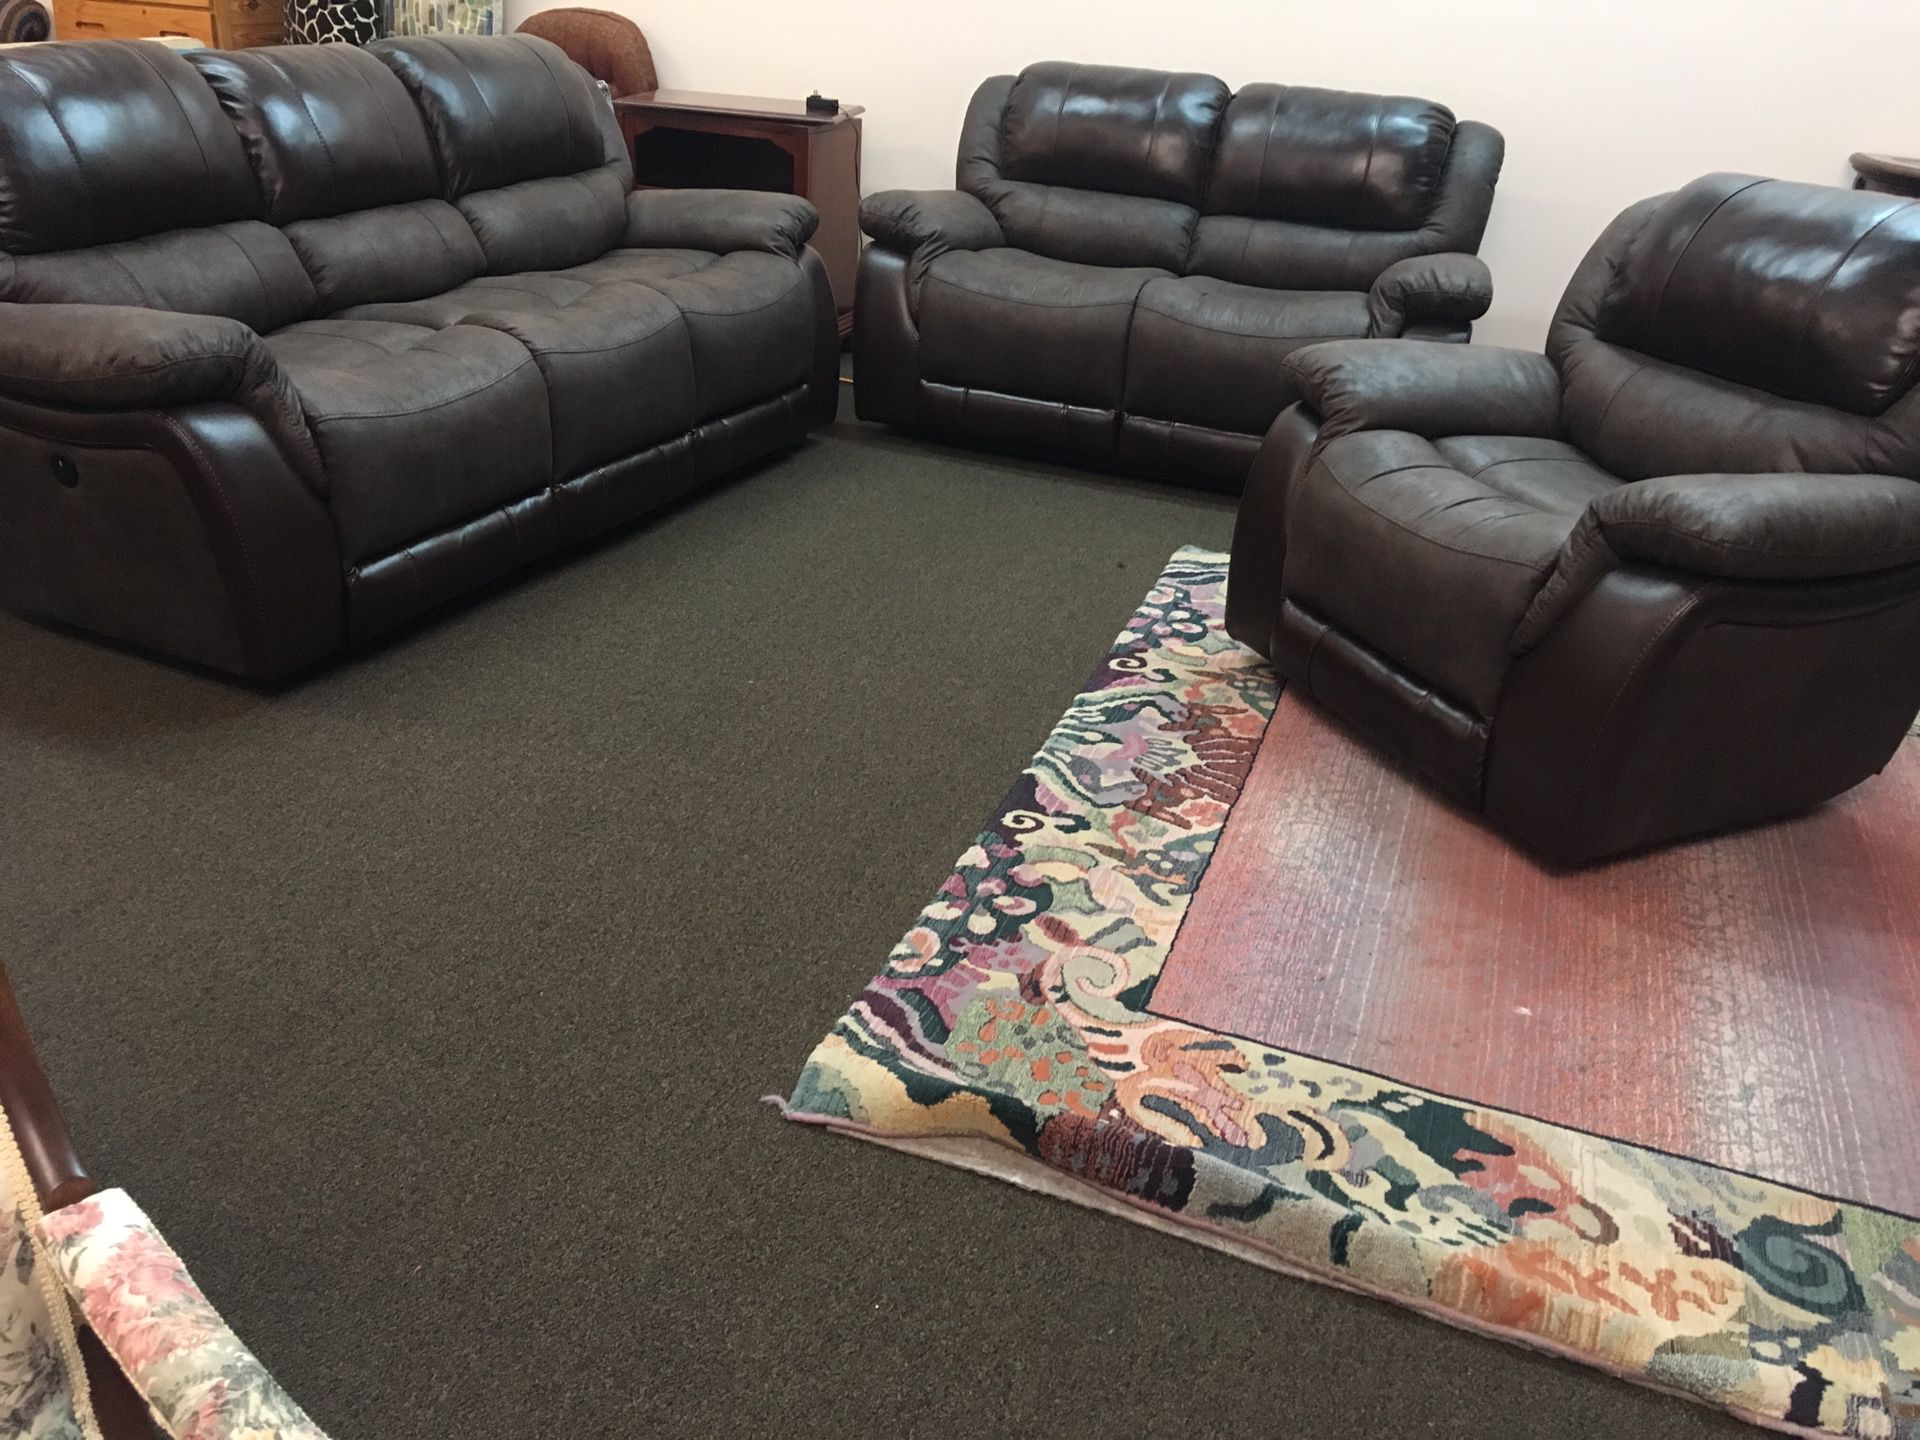 Finn leather and fabric combo brand new Piwer recliner sofa set from Highpoint furniture market